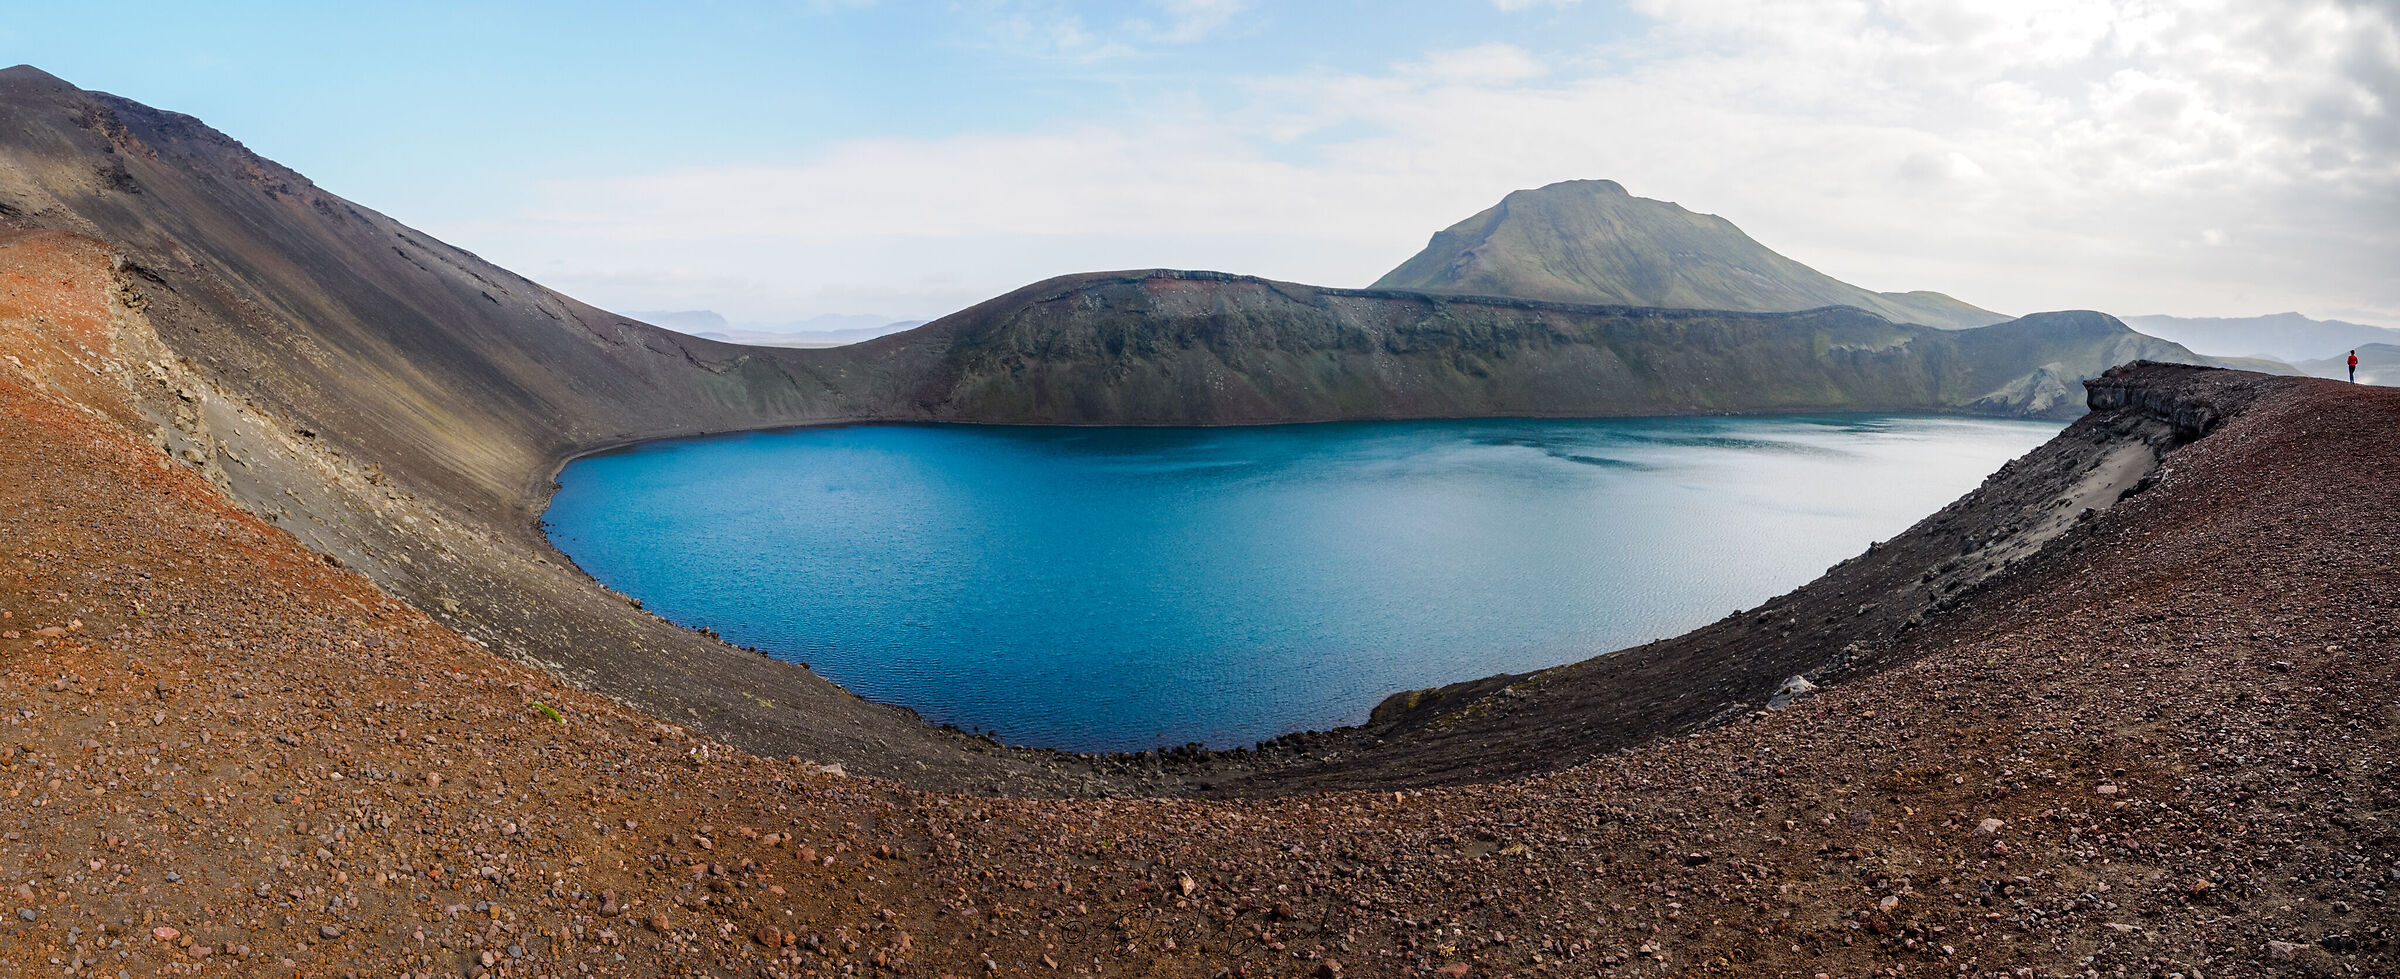 Lake in the crater...